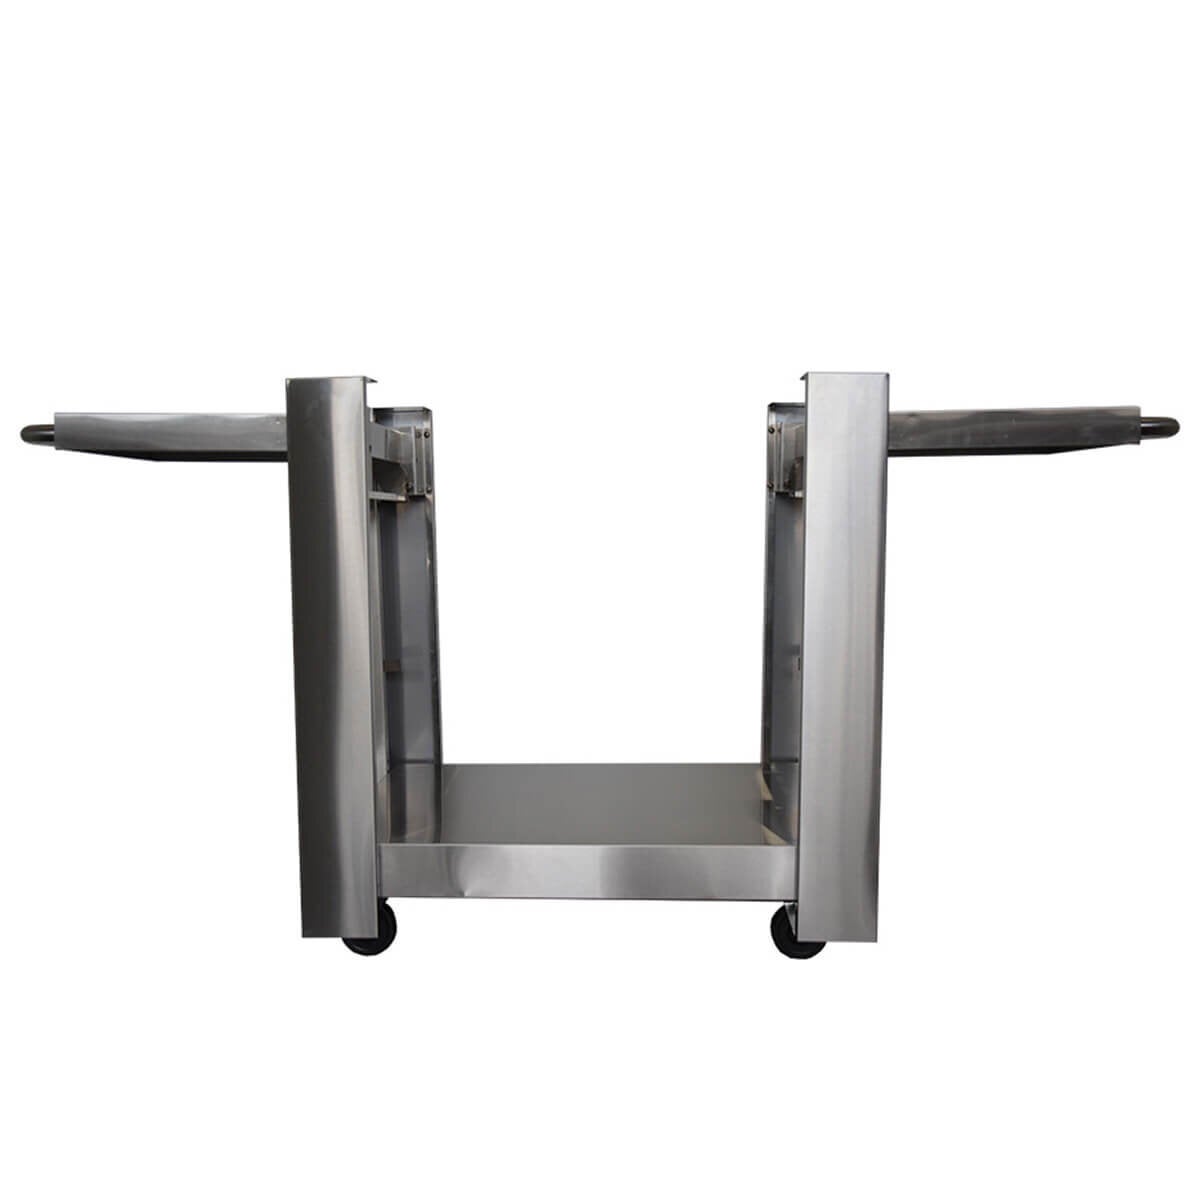 Image of Smart Freestanding Trolley For Smart Wood Fired Pizza Oven Stainless Steel PW01-C